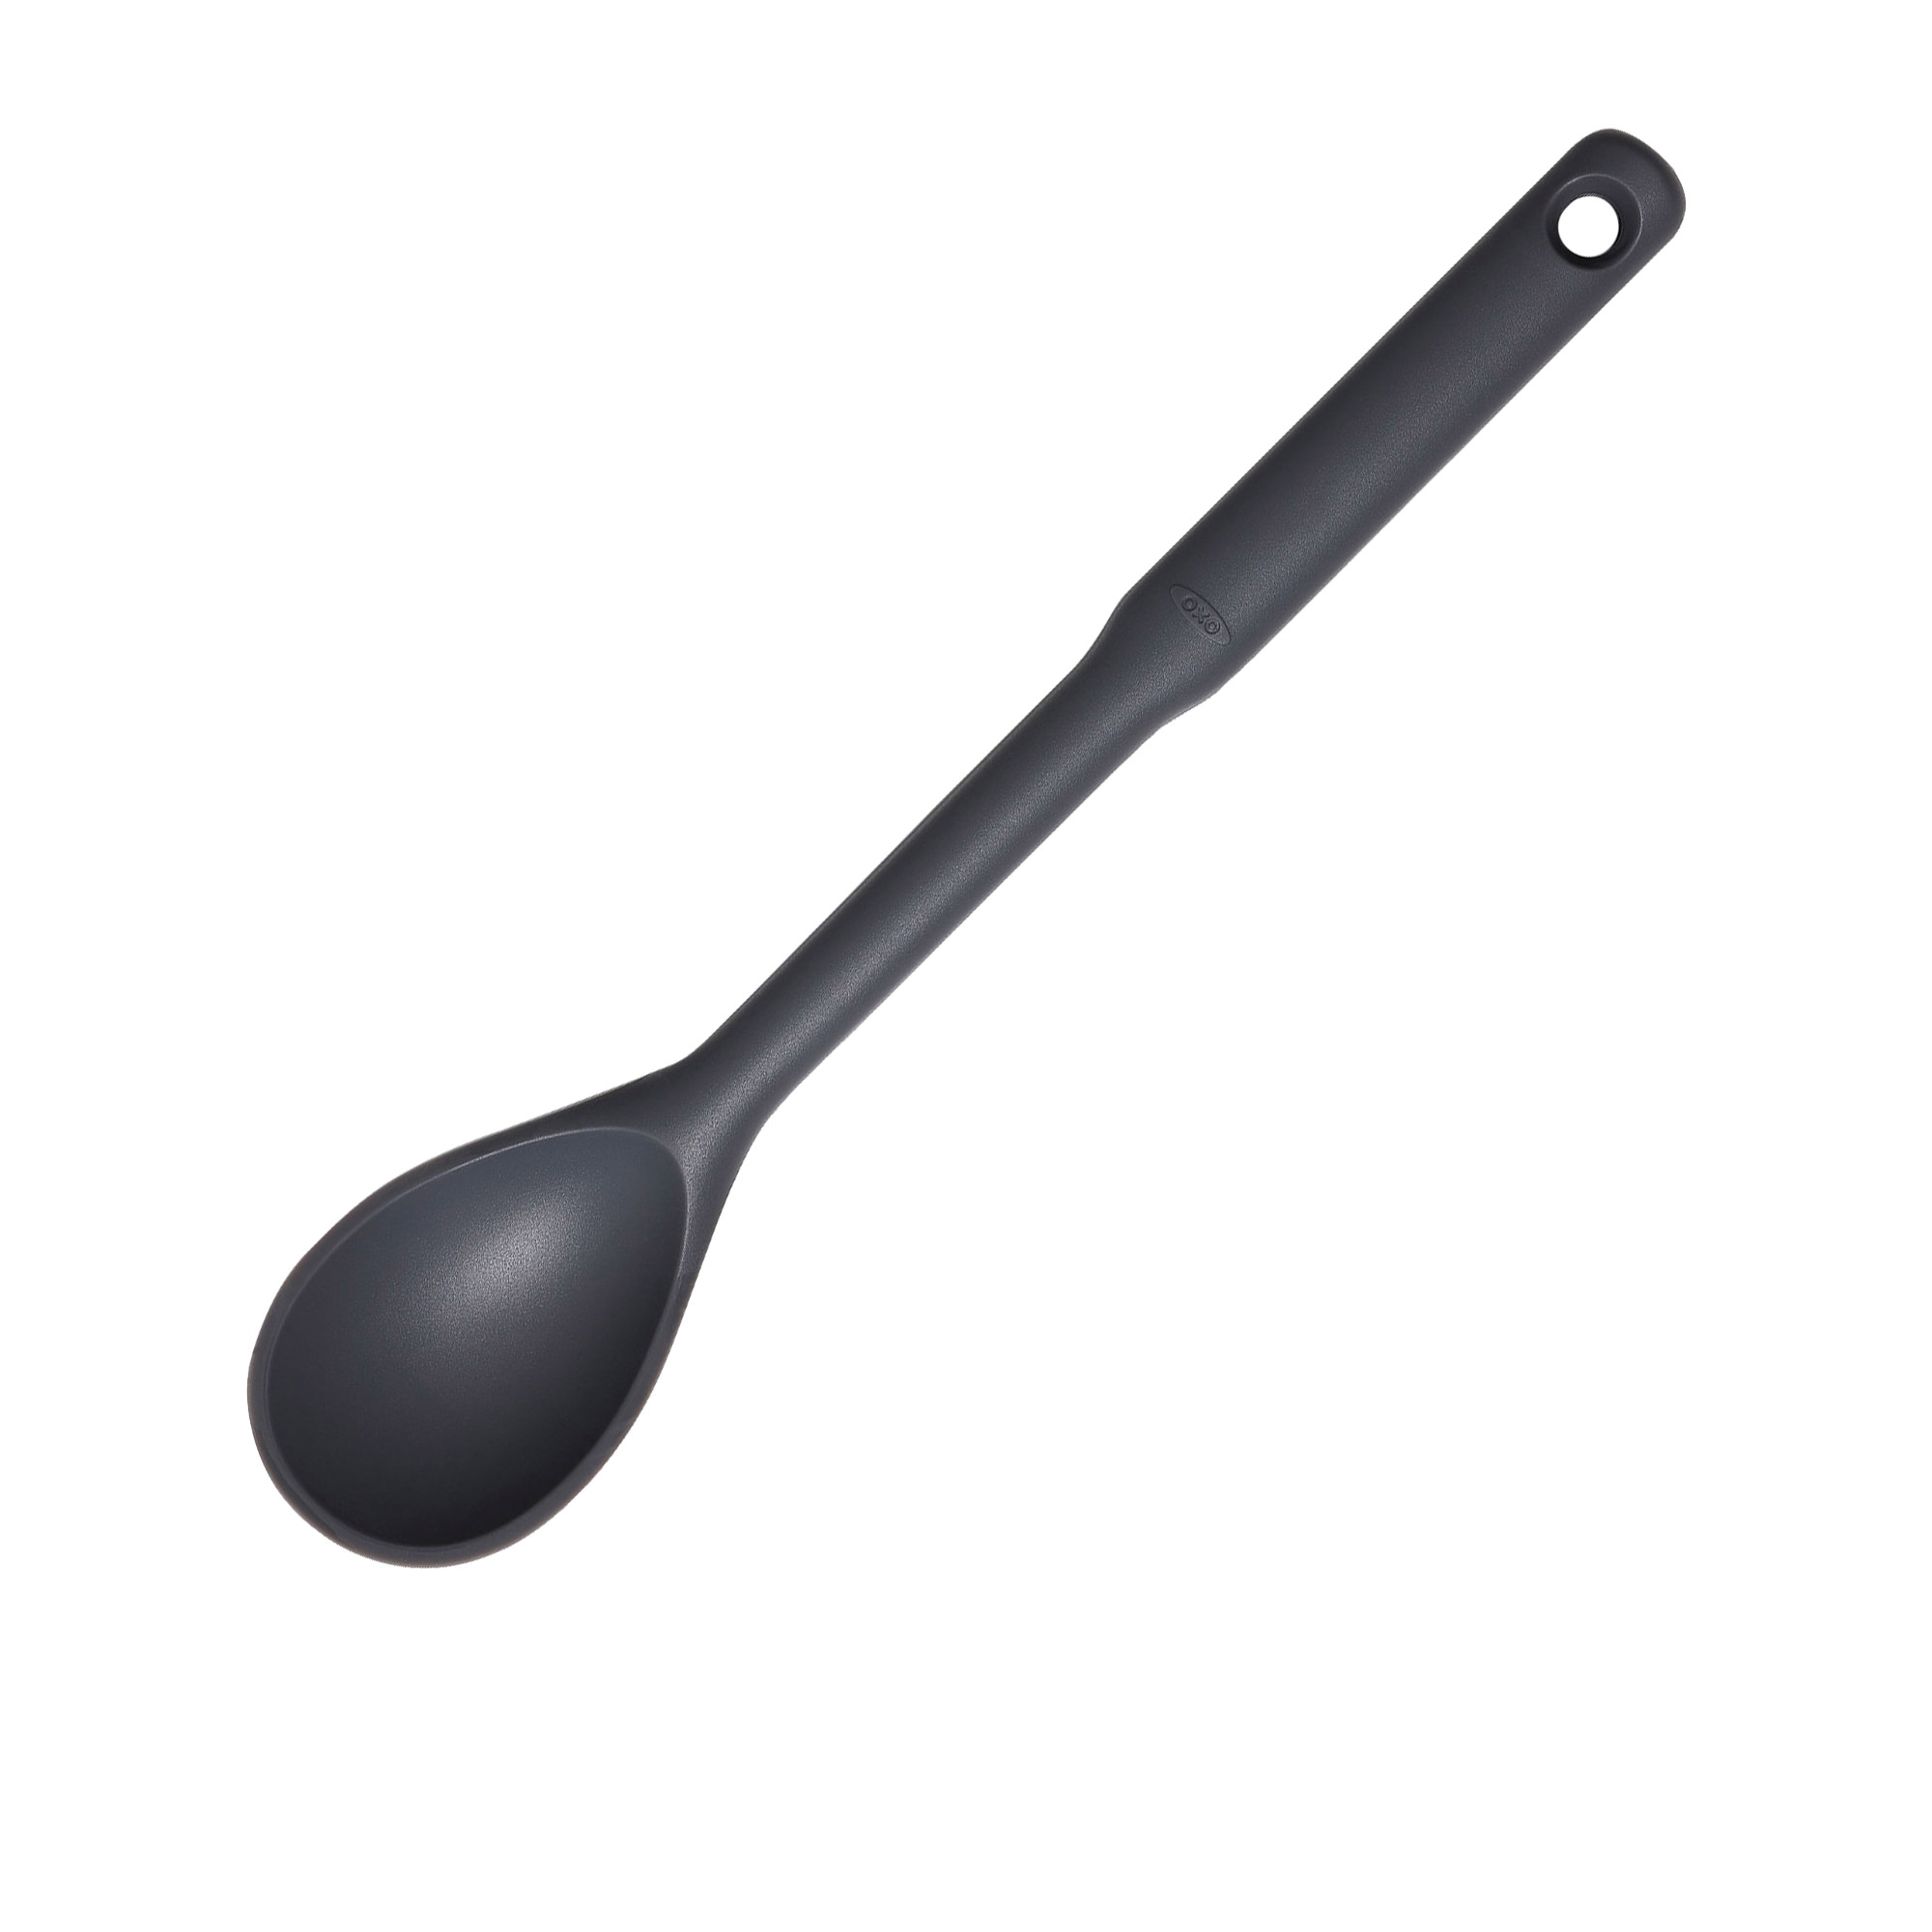 OXO Good Grips Silicone Spoon Image 1